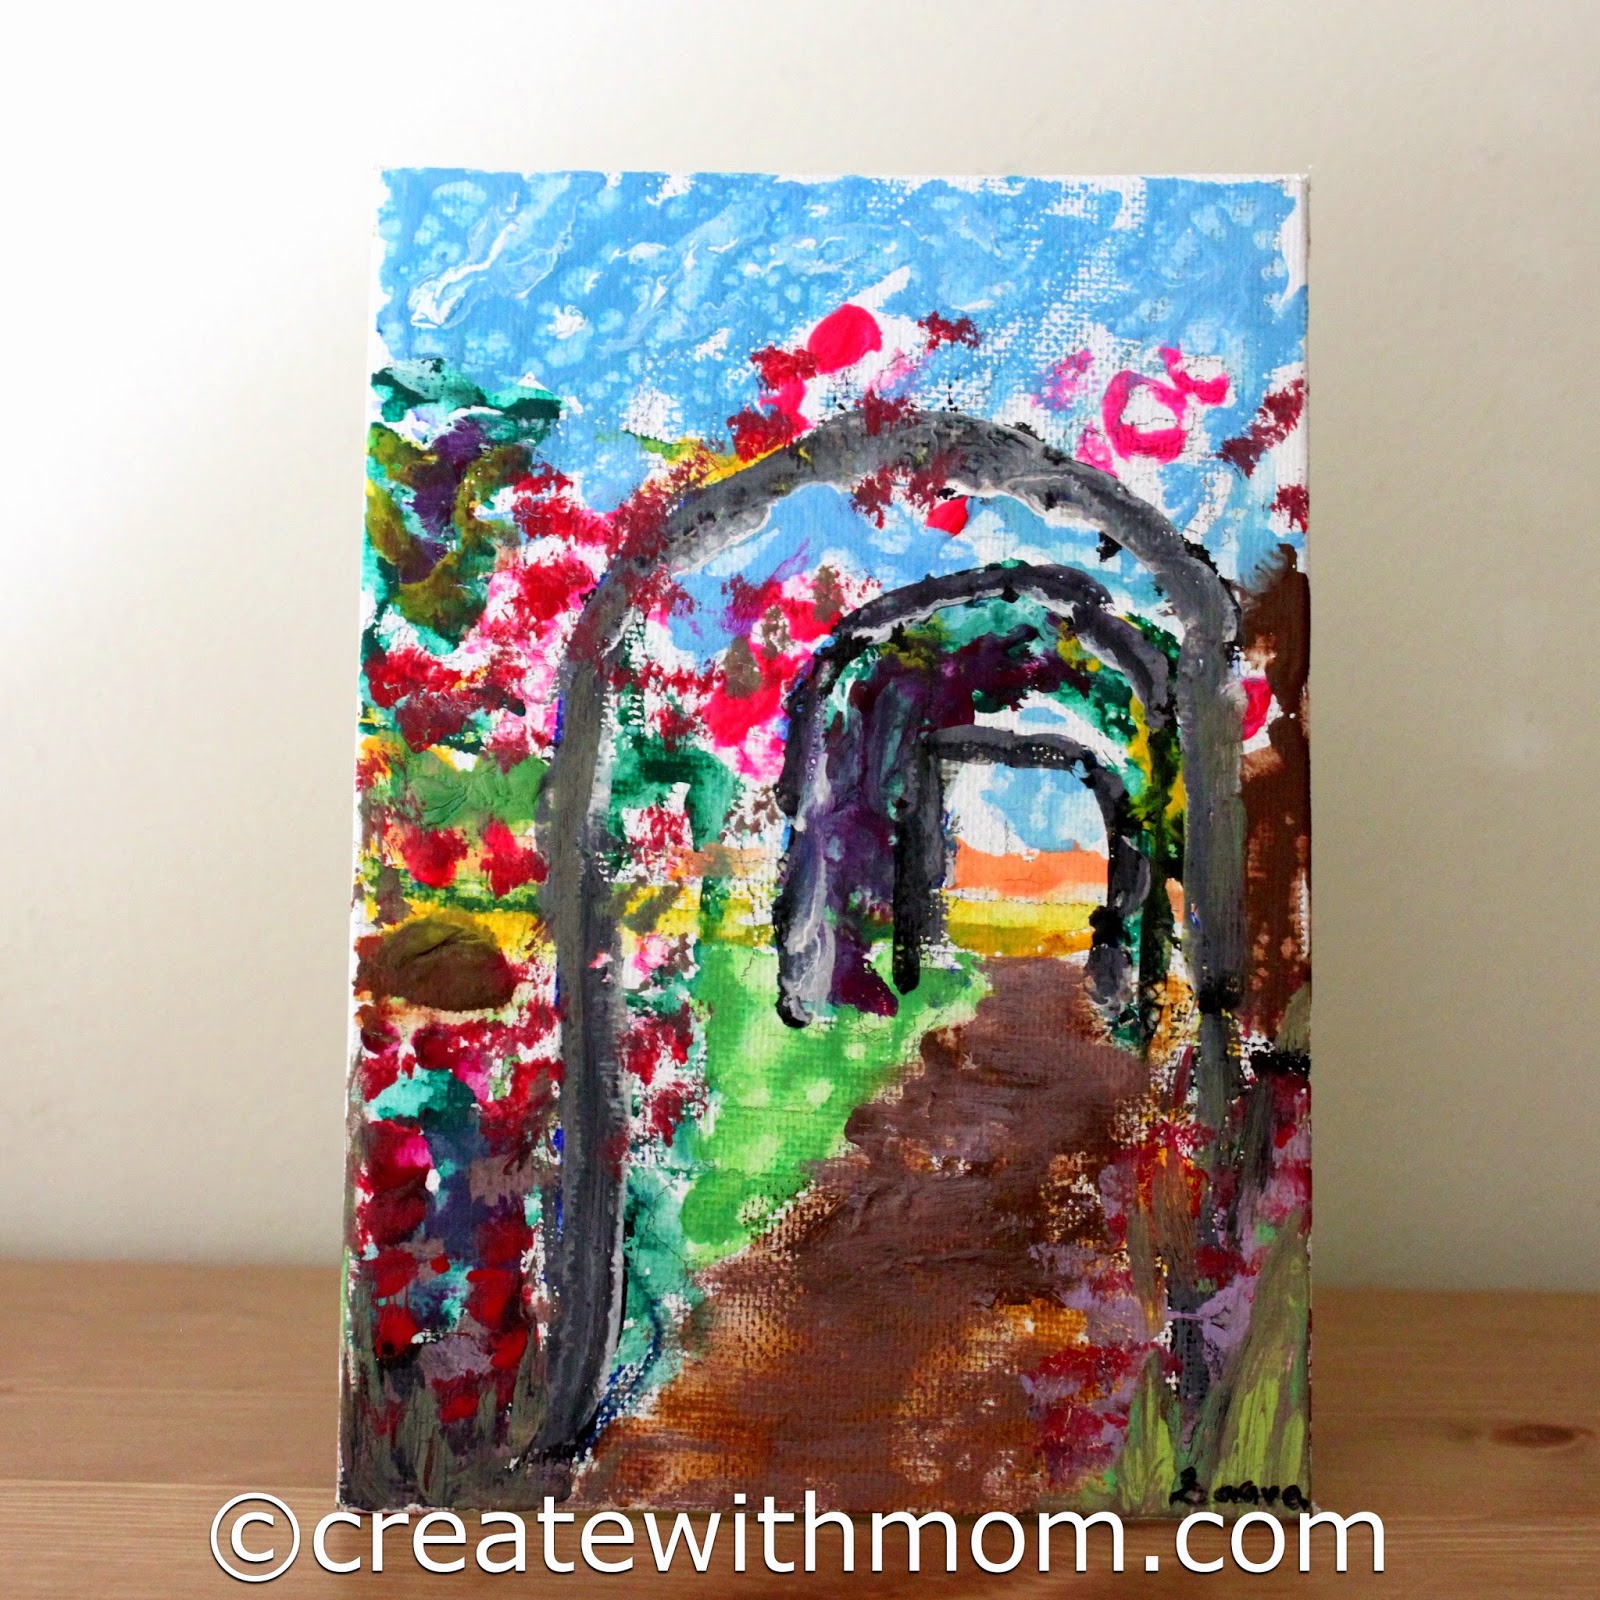 Create With Mom: Paintings We Did Inspired by the Acrylic Painting